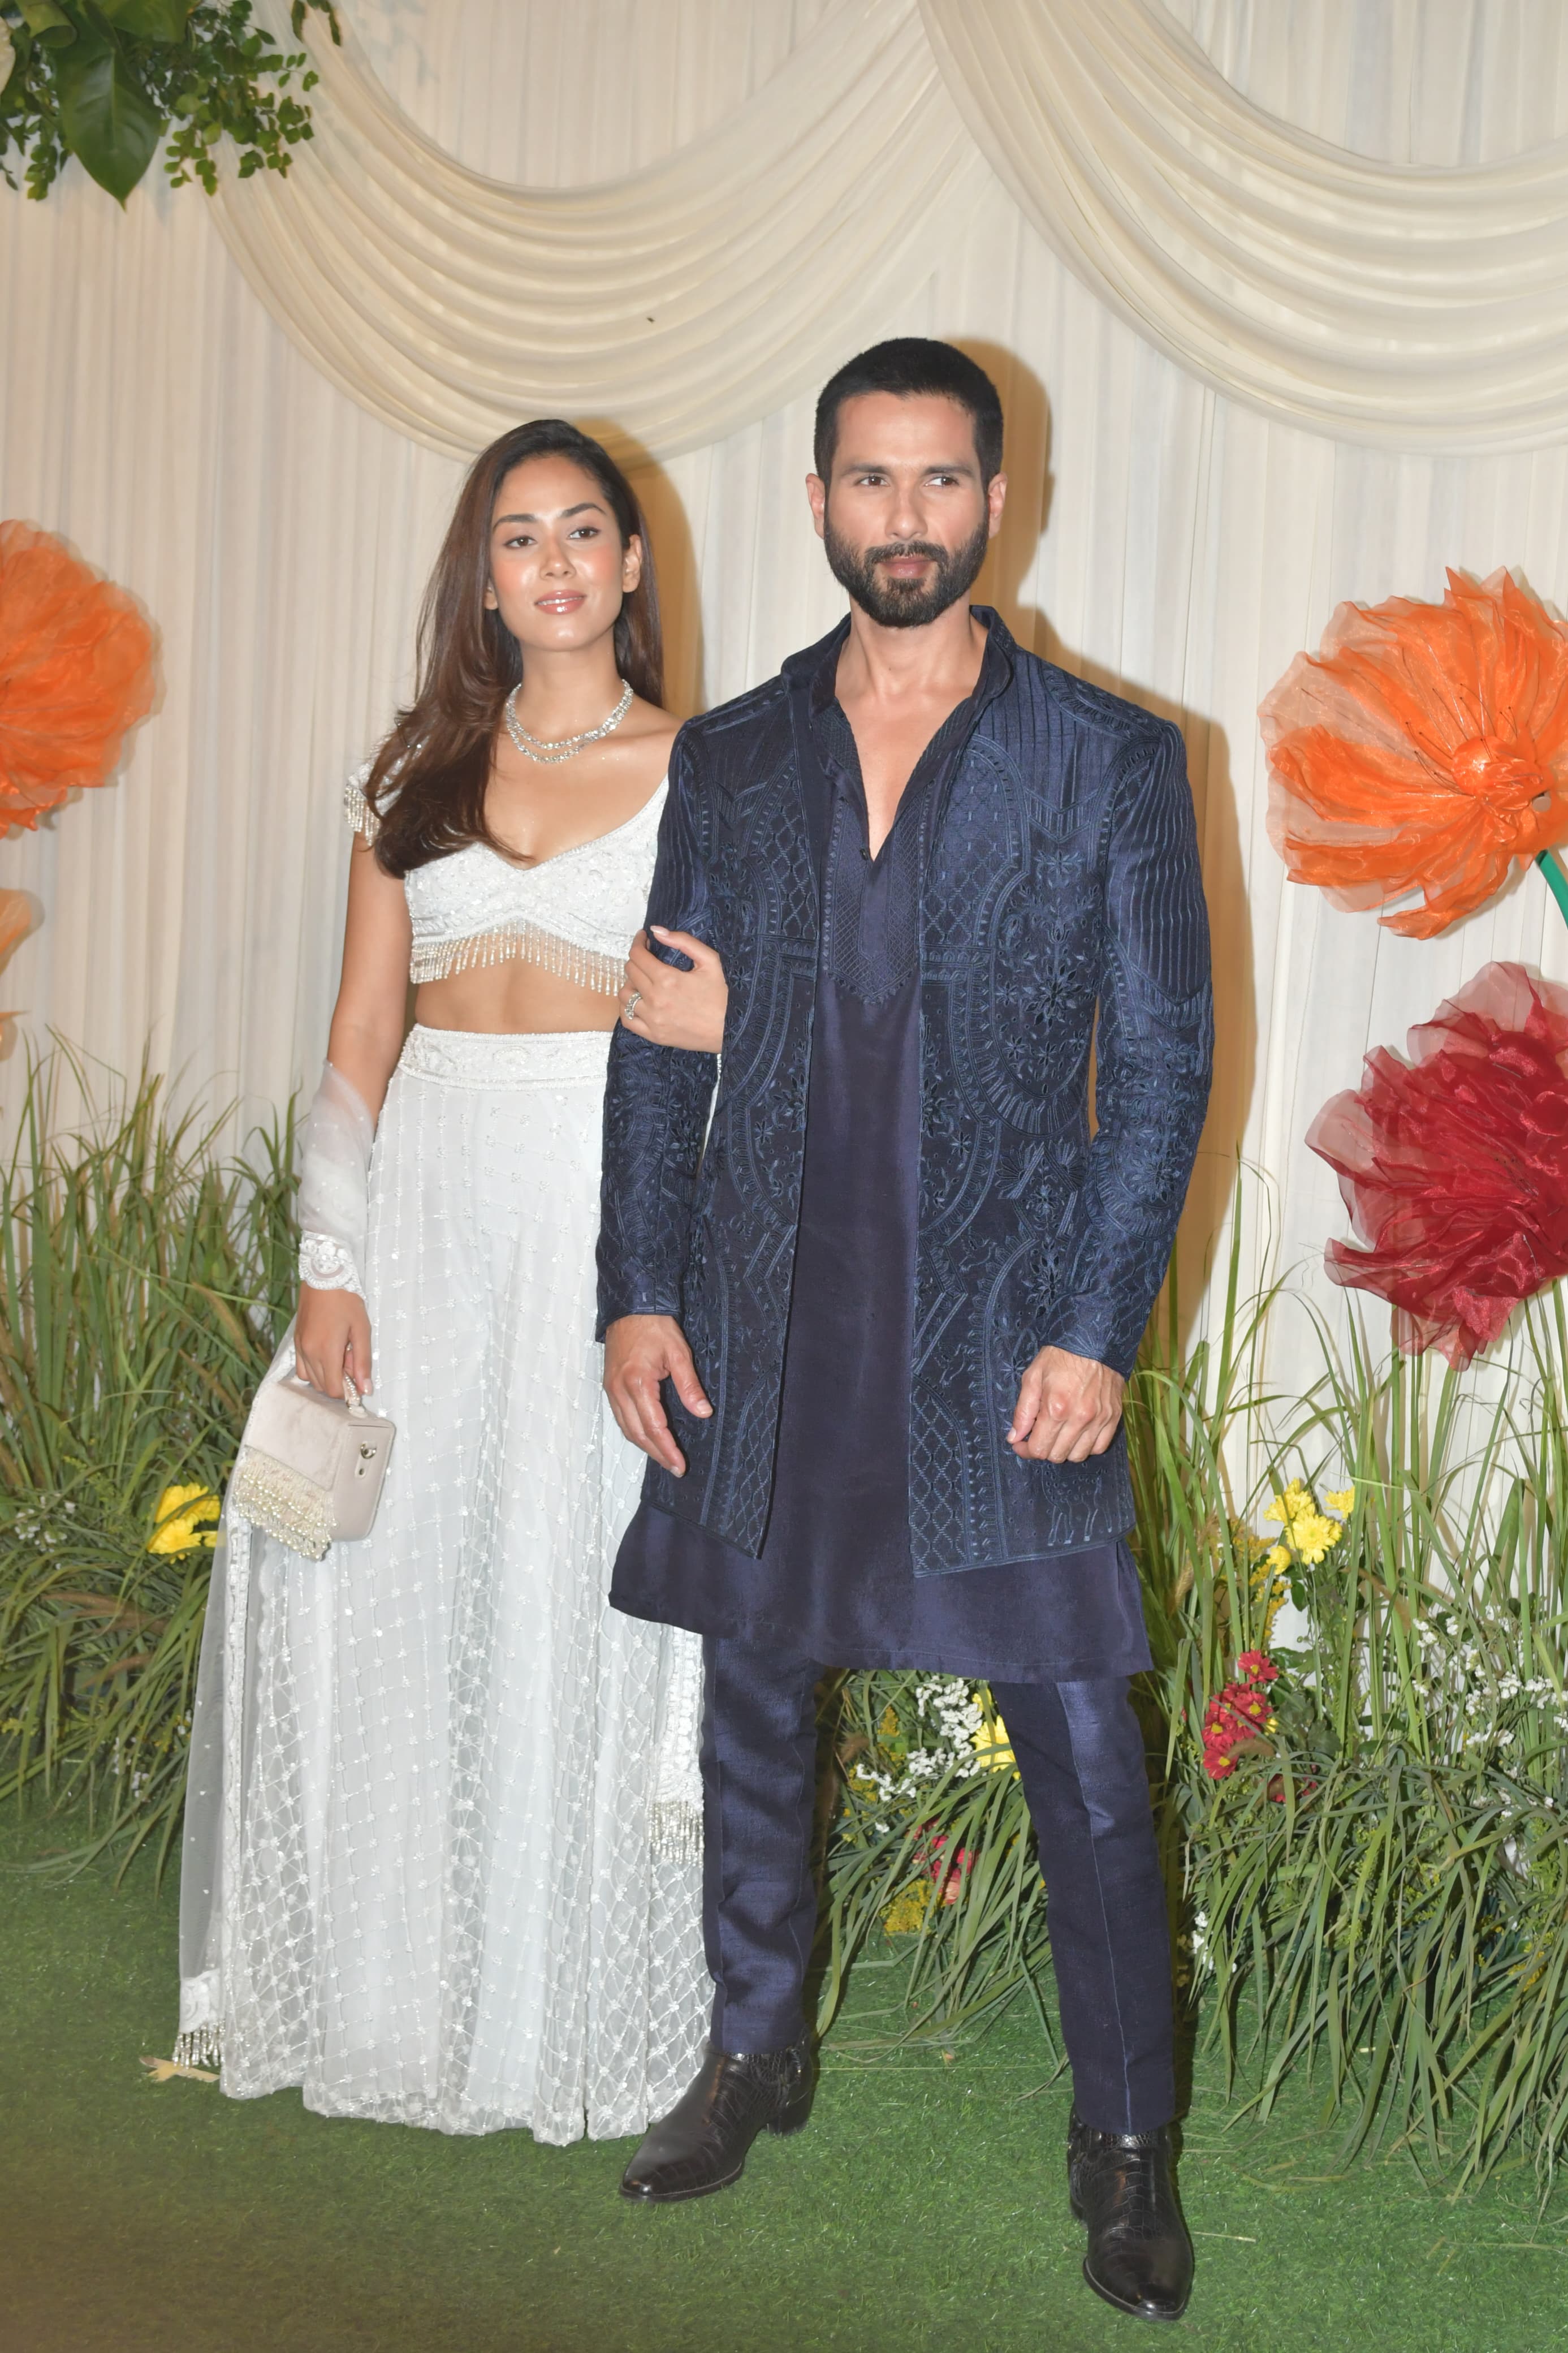 Love birds Shahid Kapoor and Mira Rajput looked super hot as they made a stylish entry at Shilpa Shetty's Diwali bash